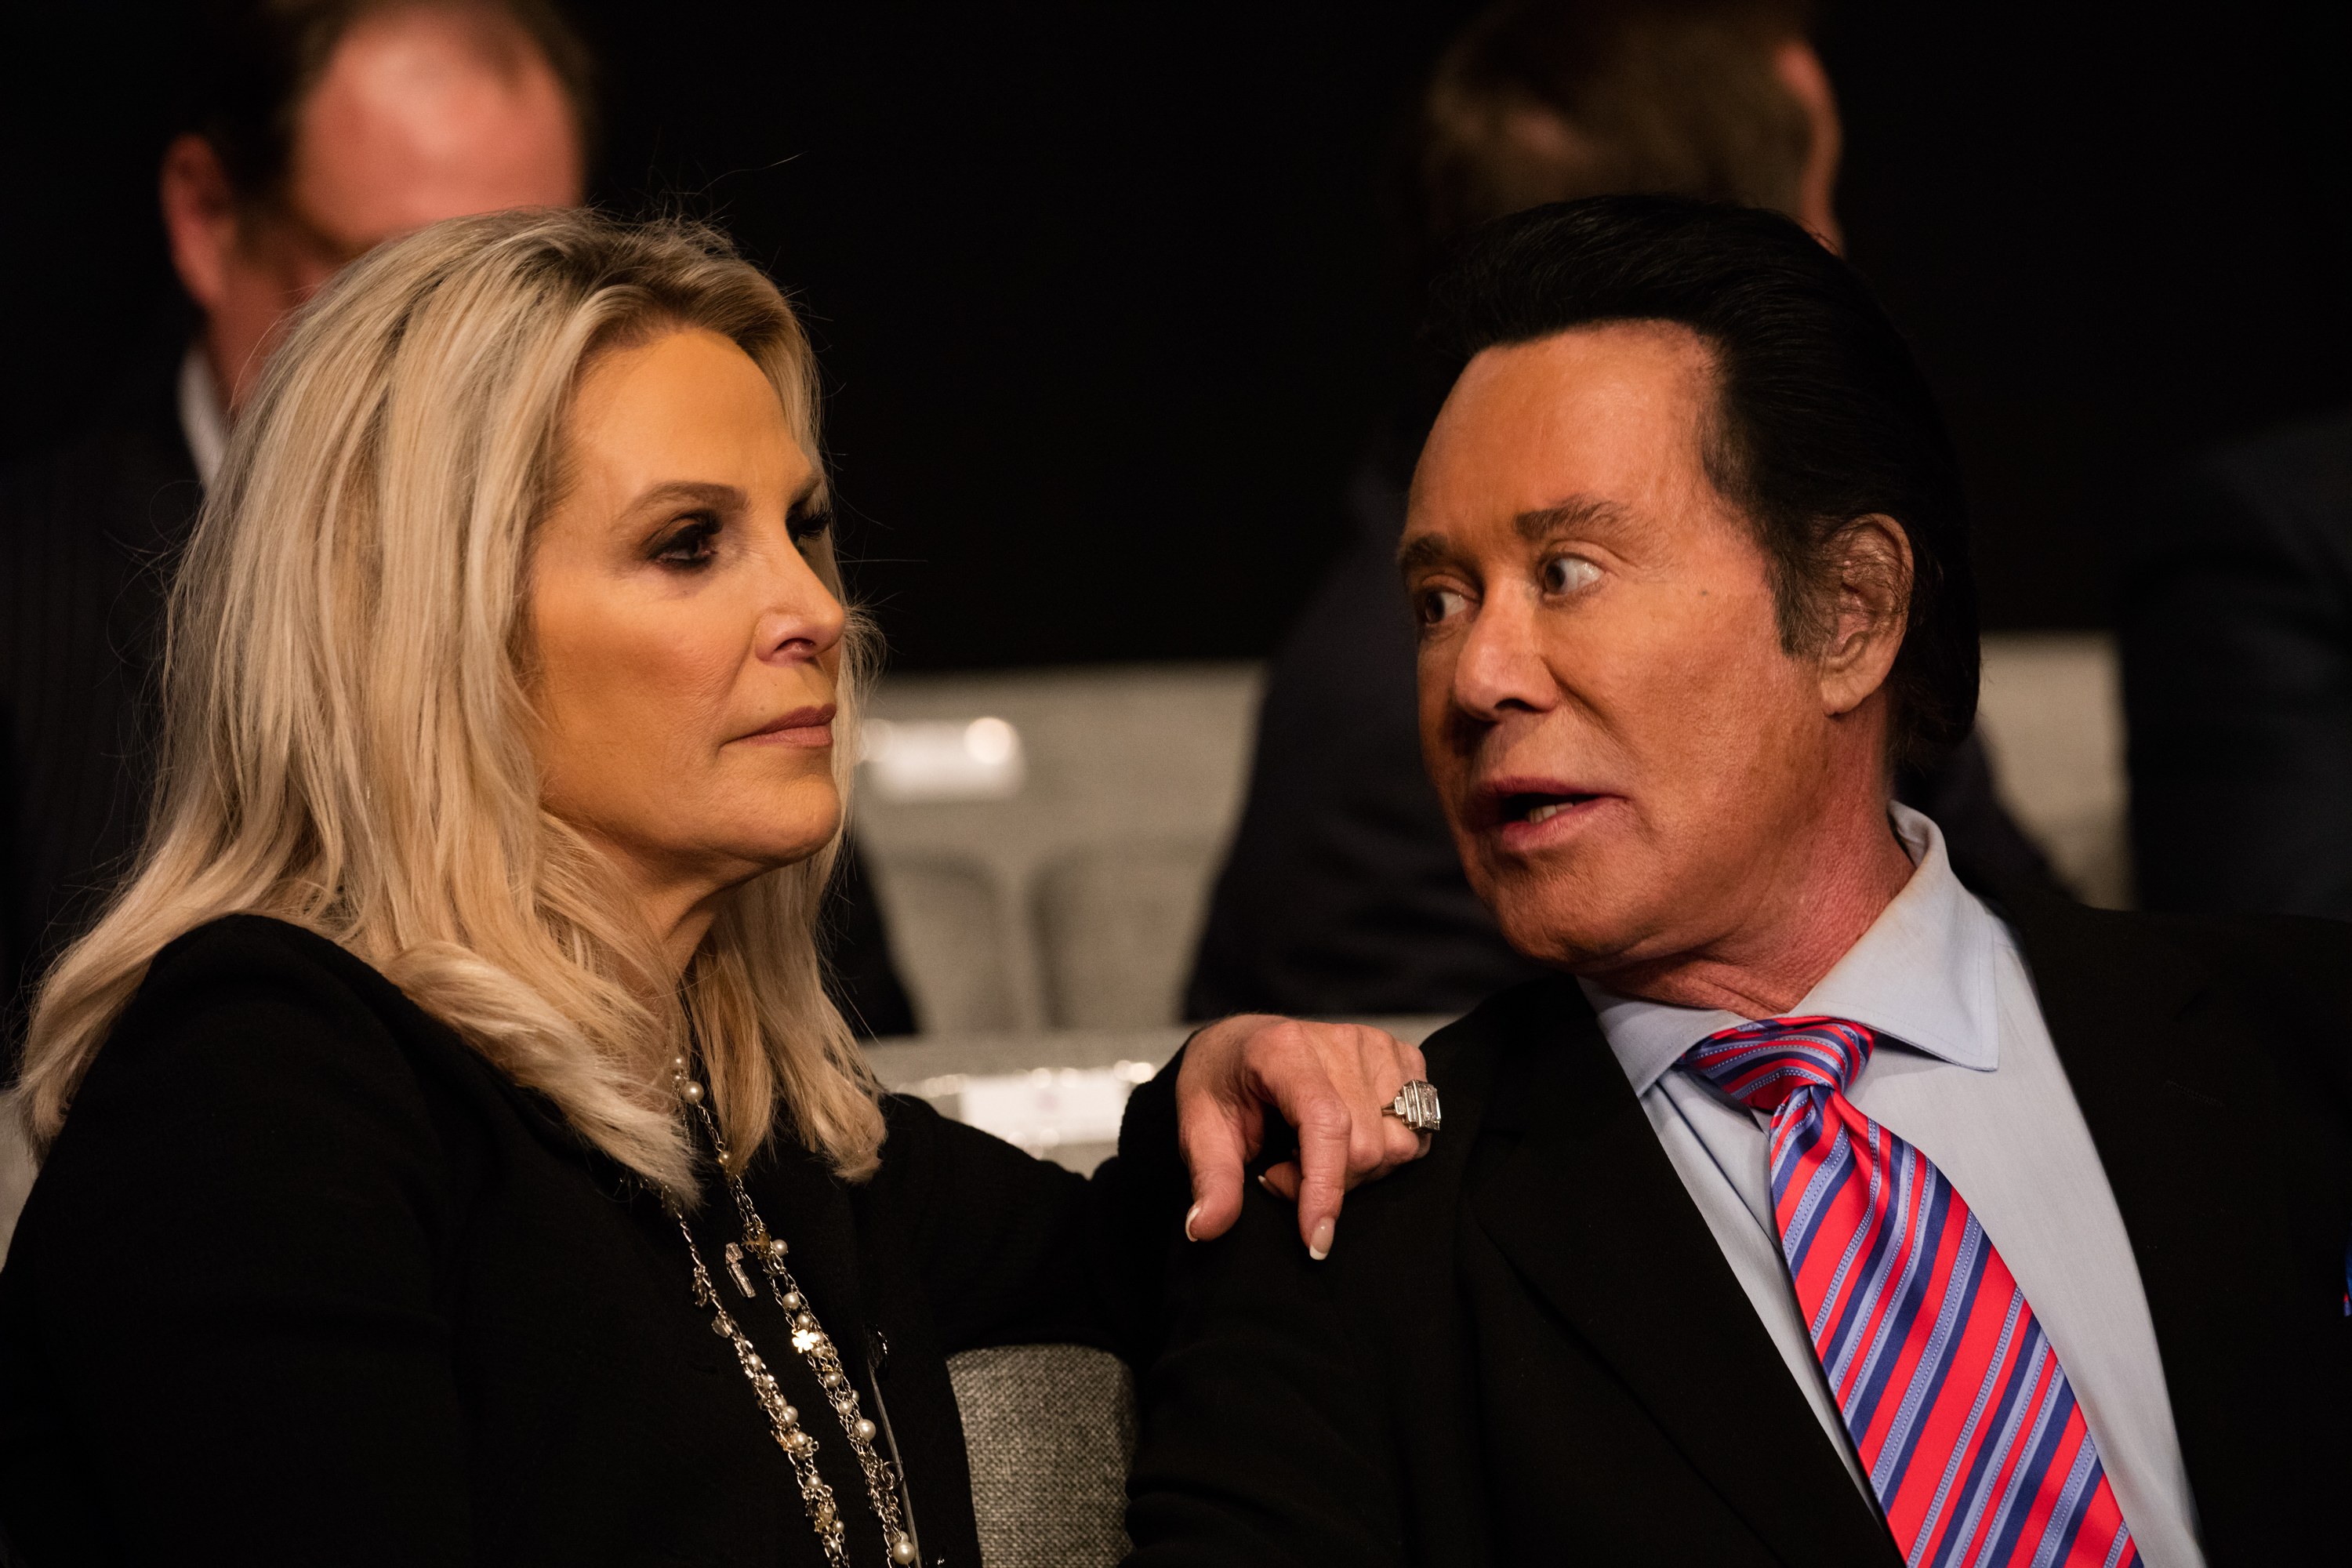 Wayne Newton and Kathleen McCrone at the third presidential debate between Democratic nominee Hillary Clinton and Republican nominee Donald Trump, Las Vegas, Nevada, October 19, 2016. | Source: Getty Images